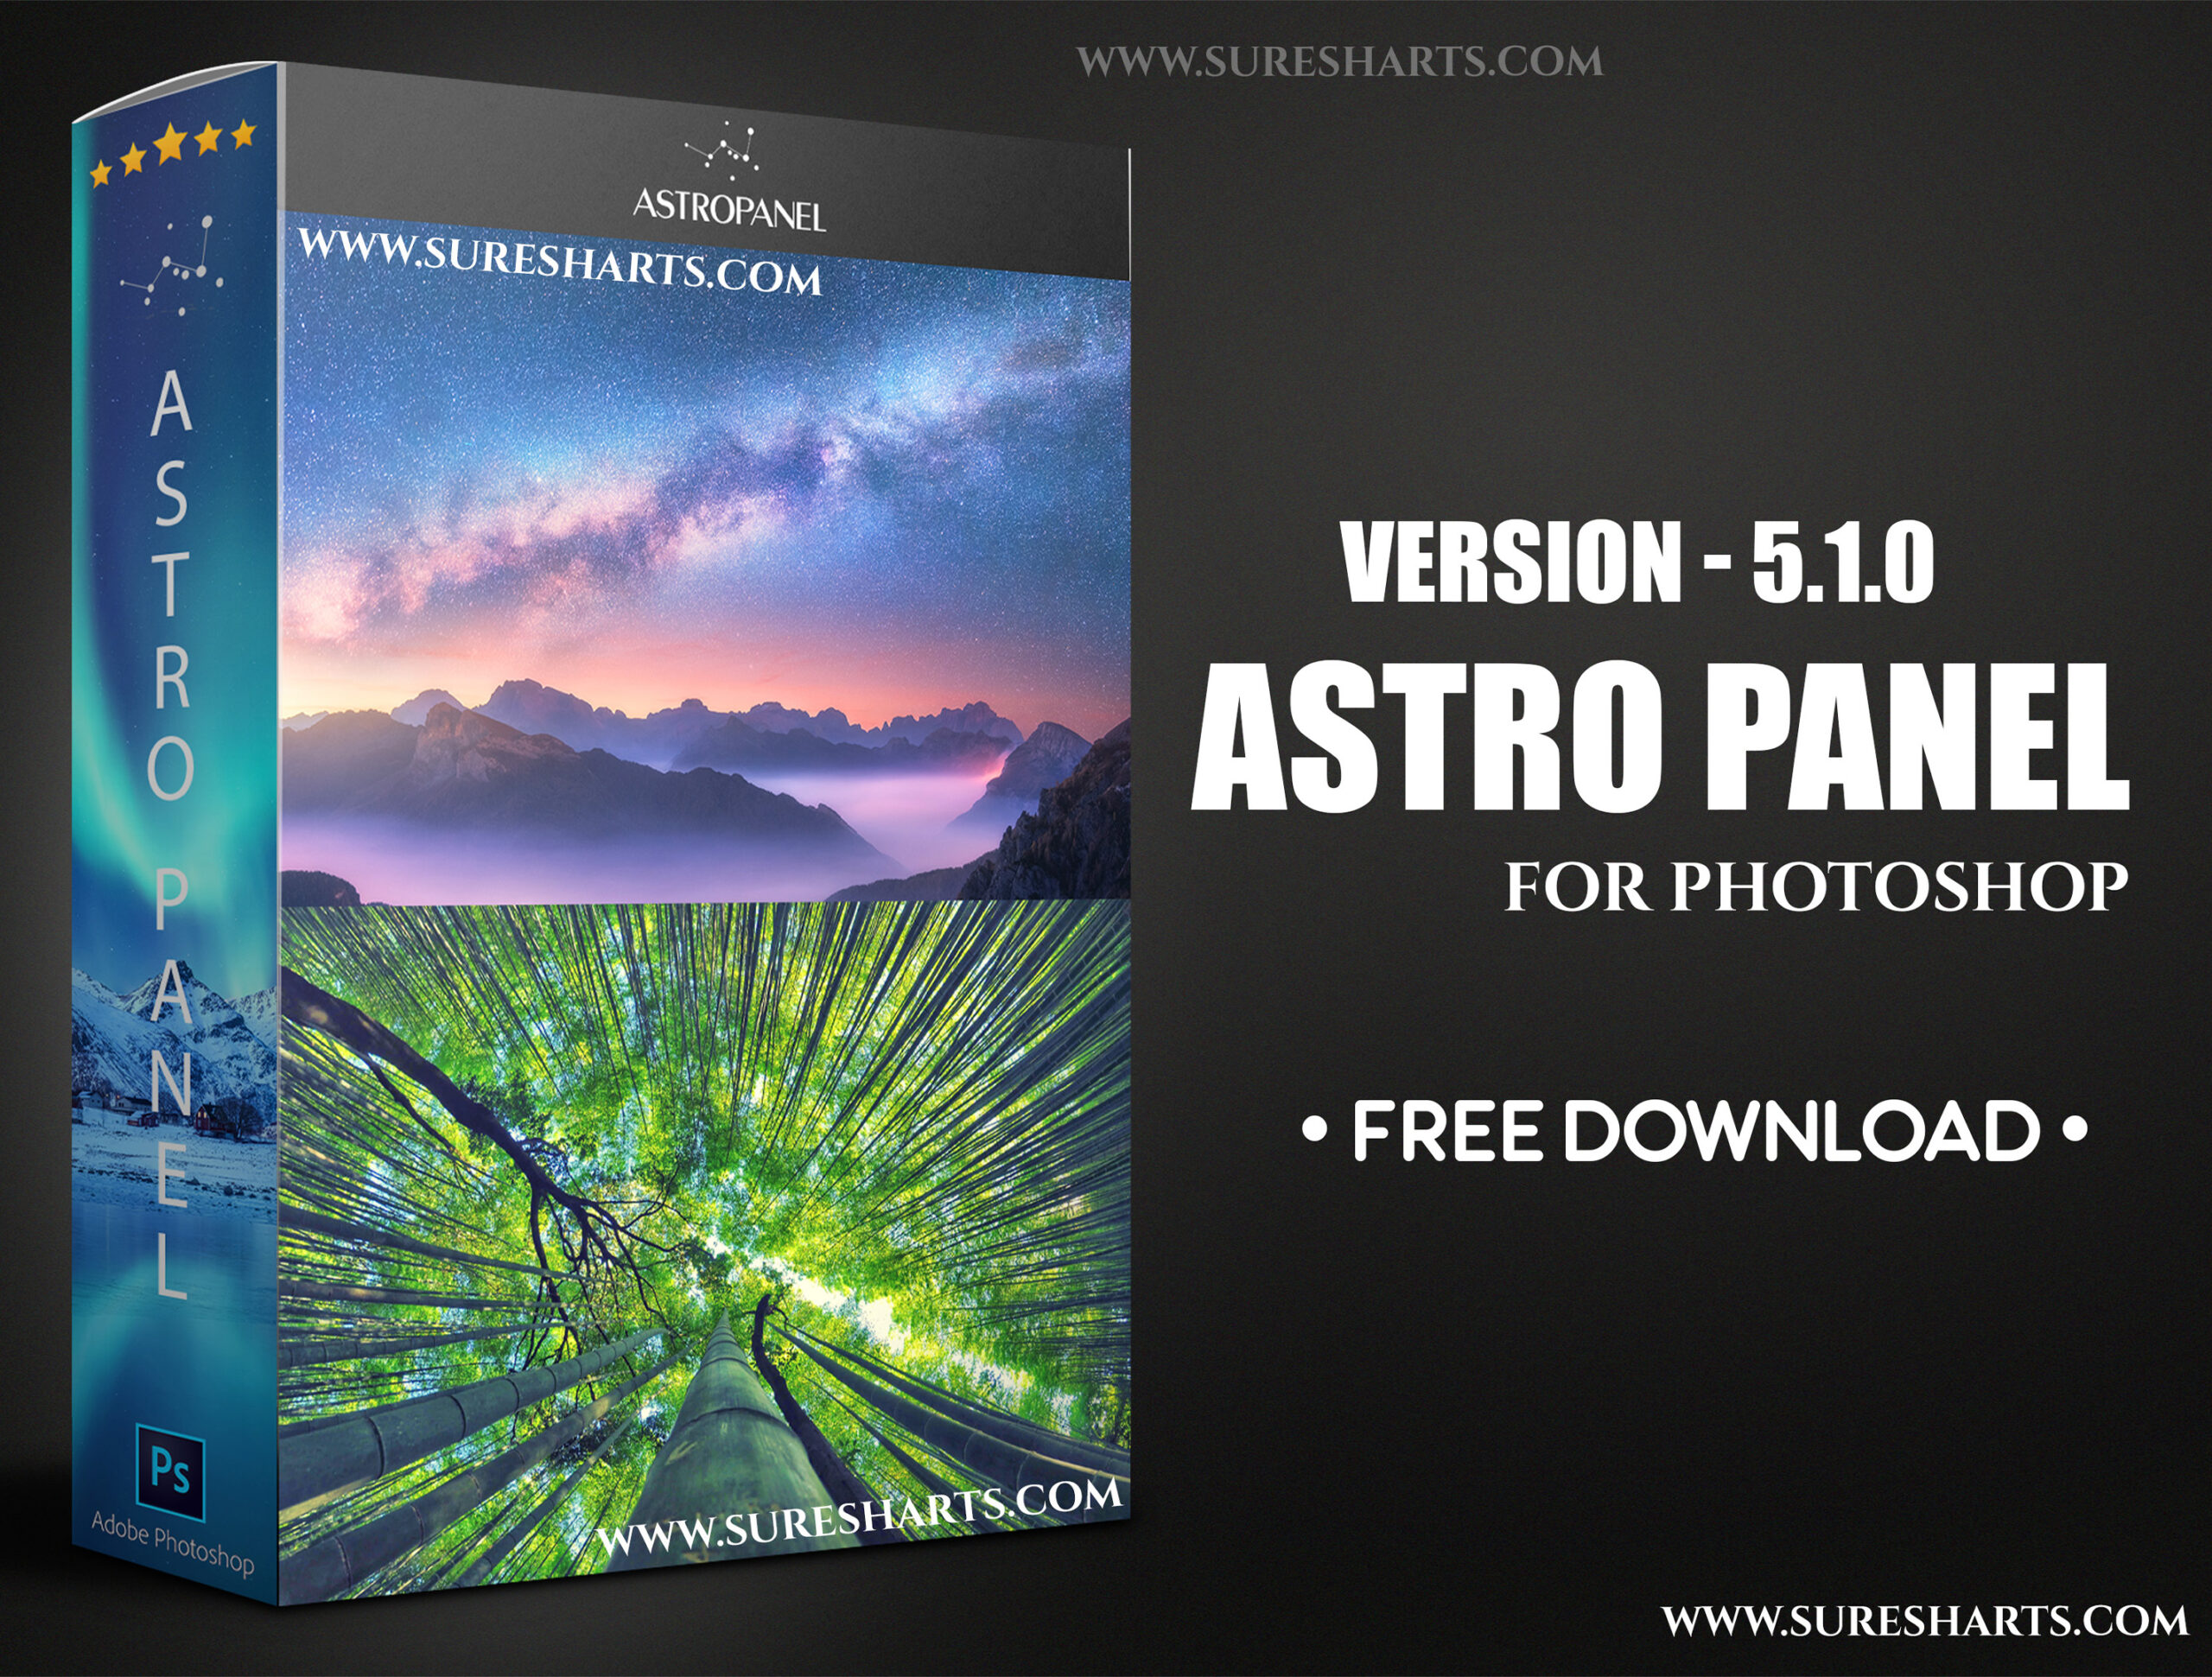 Astro Panel for Adobe Photoshop 5.1.0 – Free Download